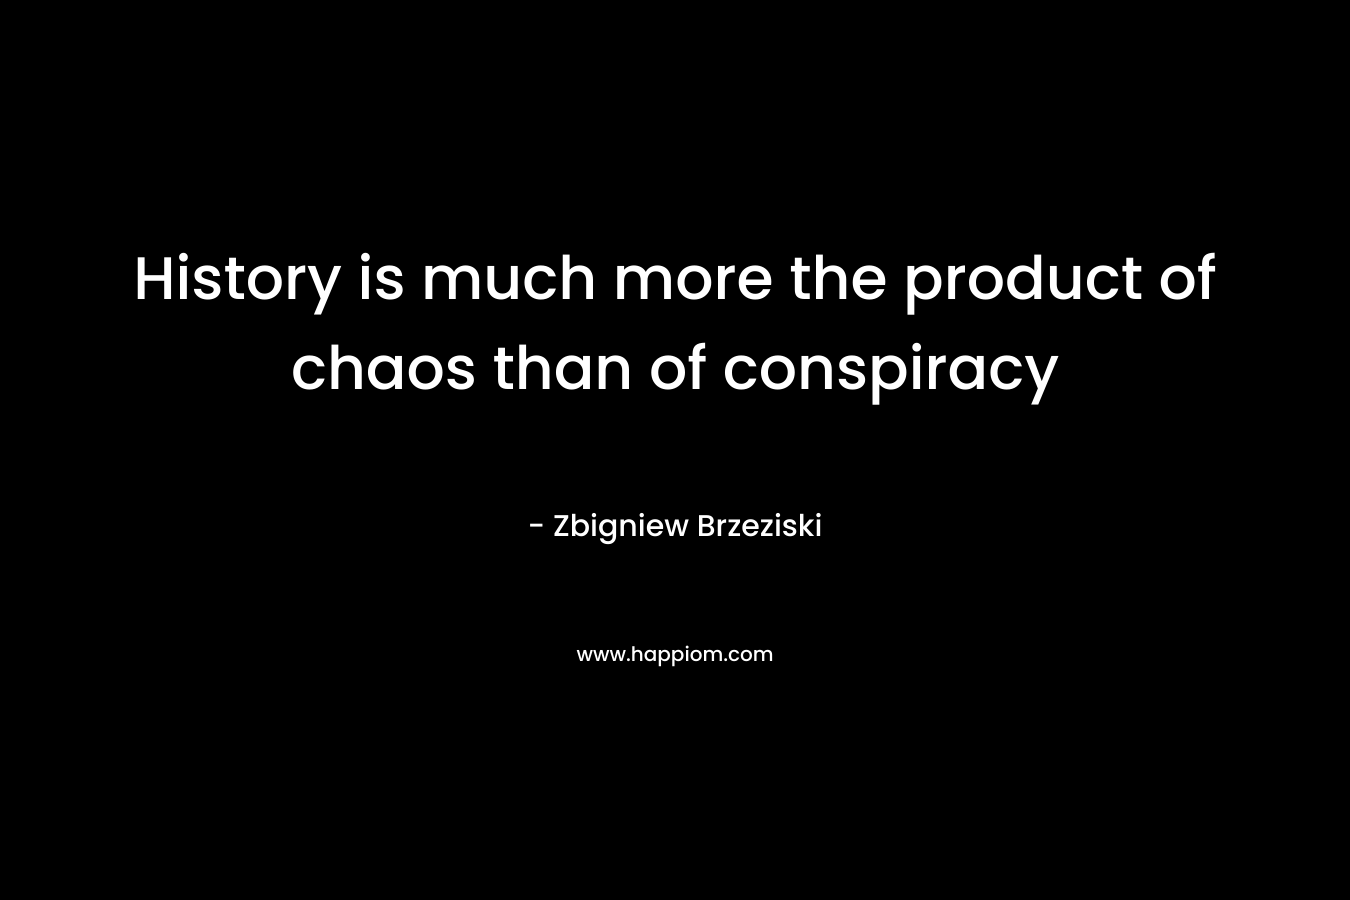 History is much more the product of chaos than of conspiracy